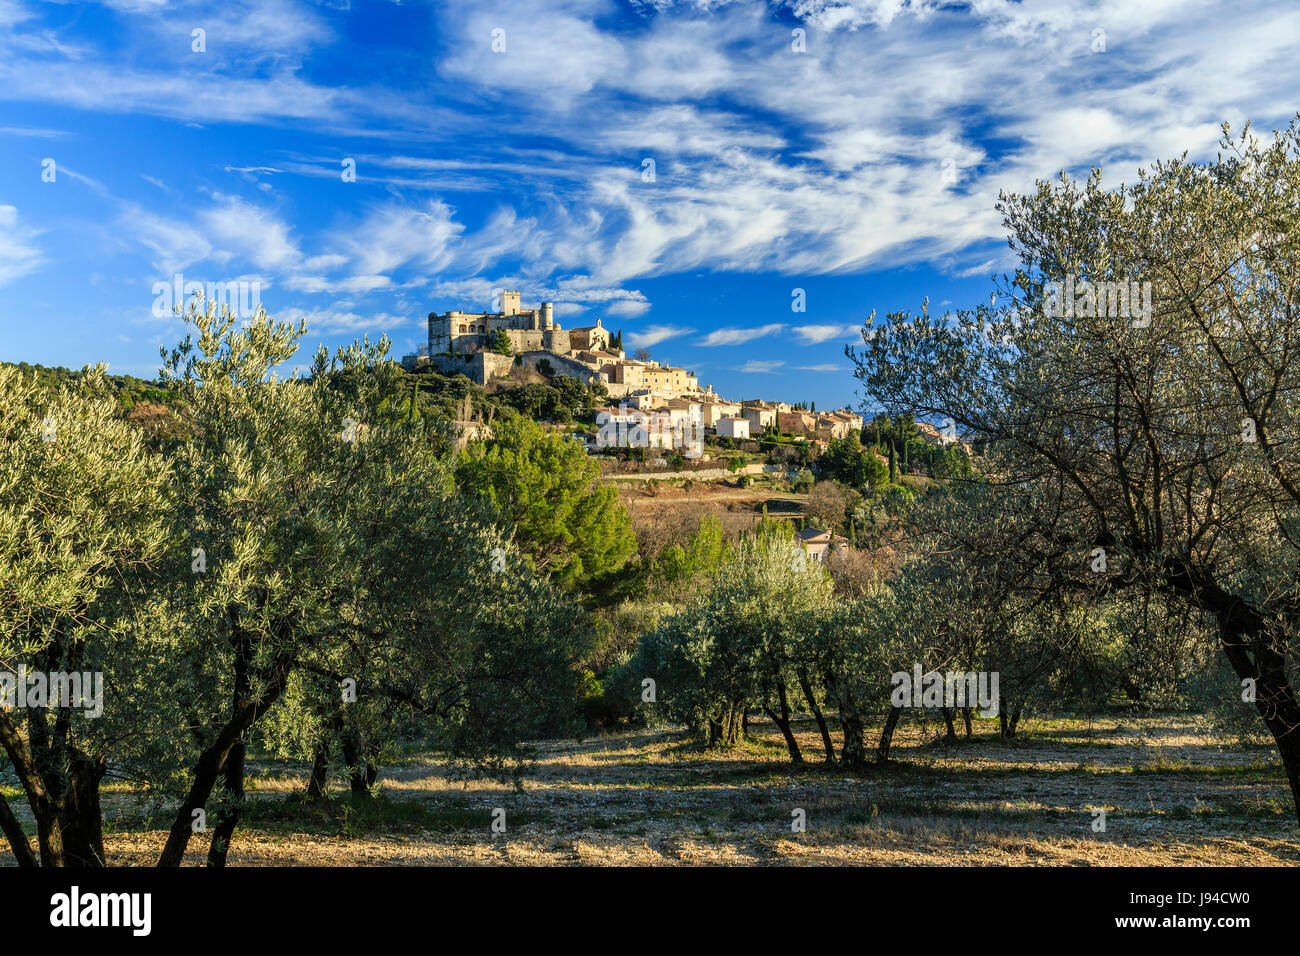 France, Vaucluse, Le Barroux, the village topped with the castle seen from an olive grove Stock Photo